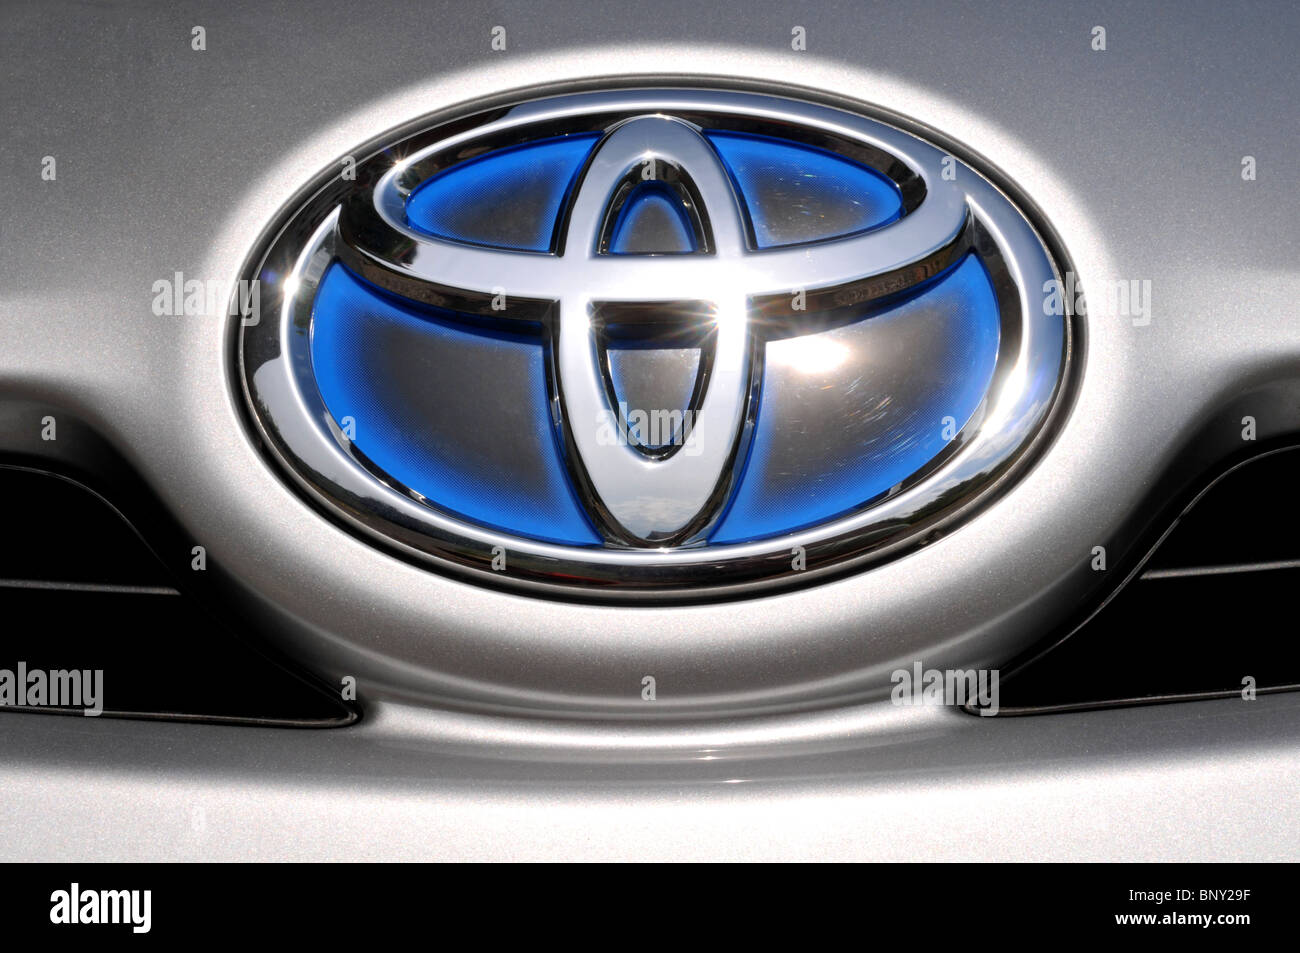 Location voiture Toyota, Toyota badge Banque D'Images